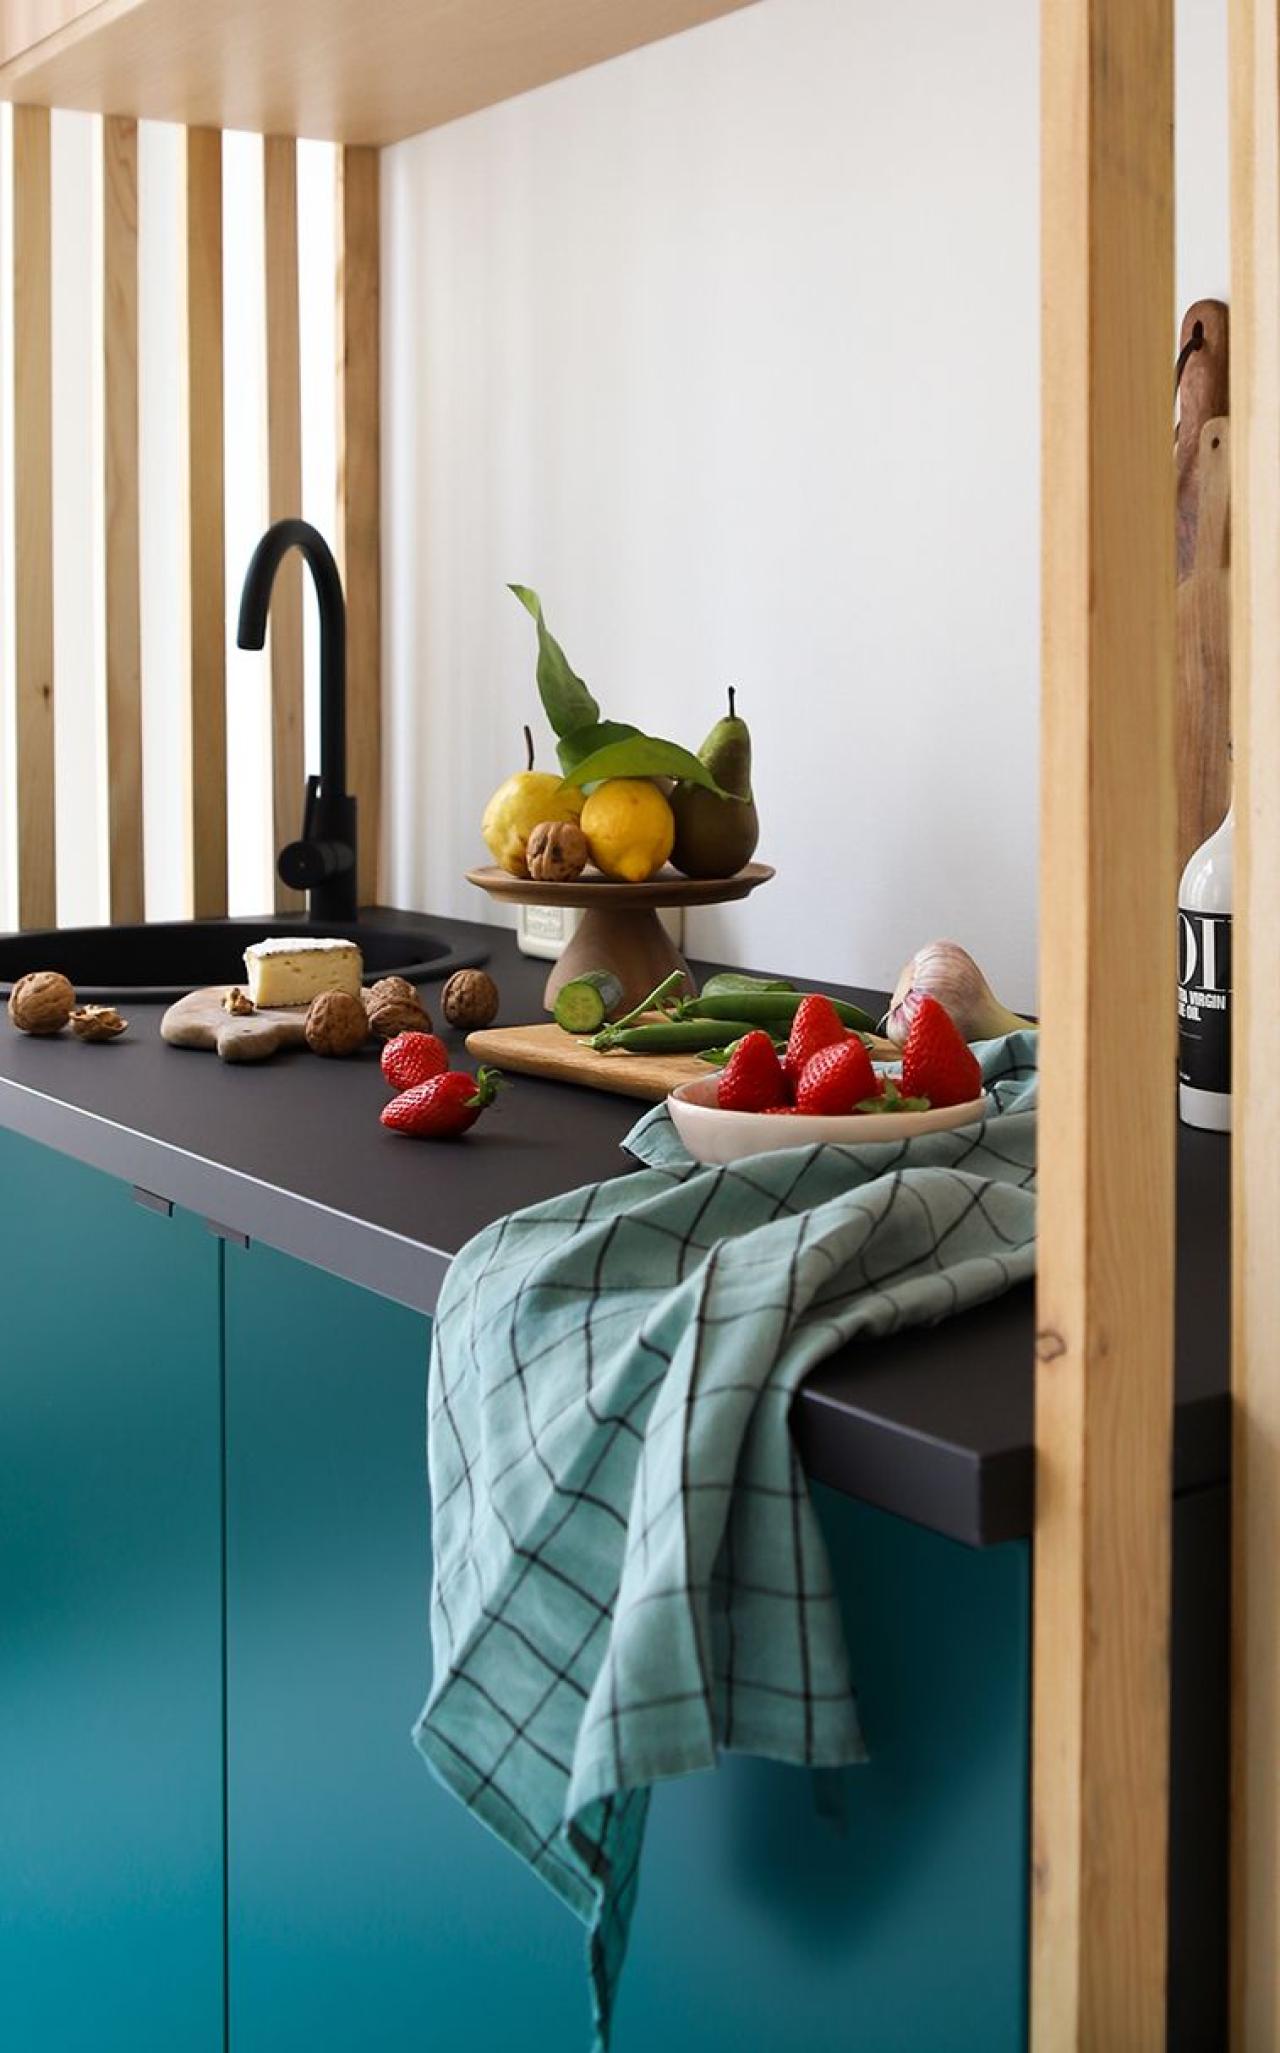 Kitchenette in natural Oak and Green 04 - Sauvage framed by claustra